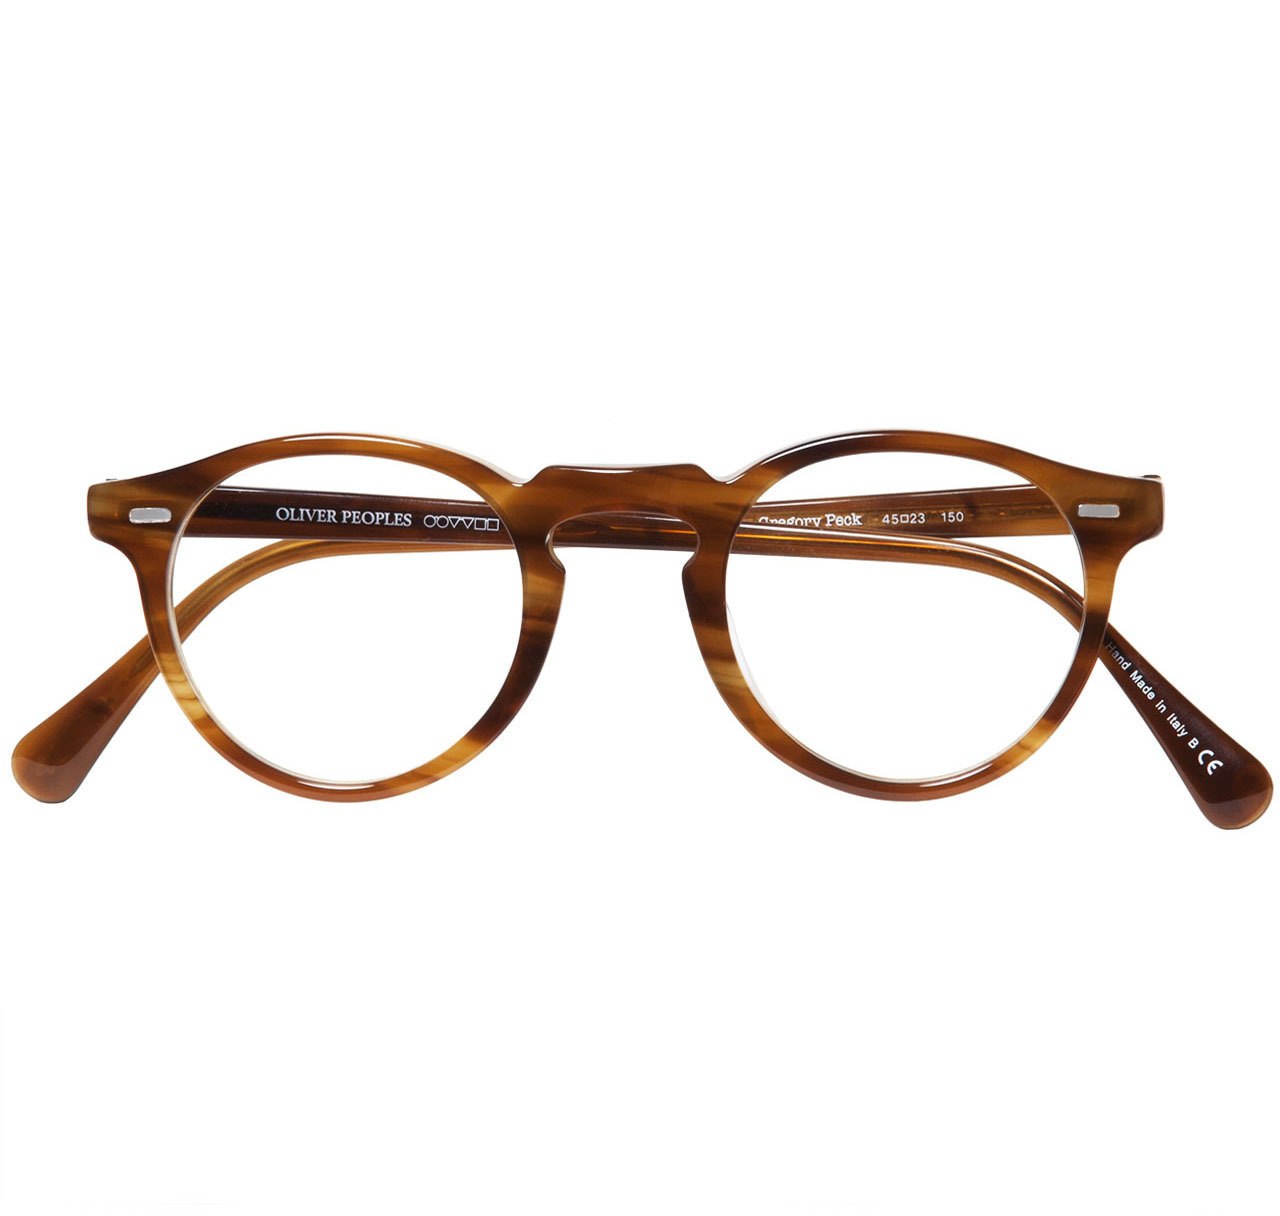 Oliver Peoples Gregory Peck Raintree Rx